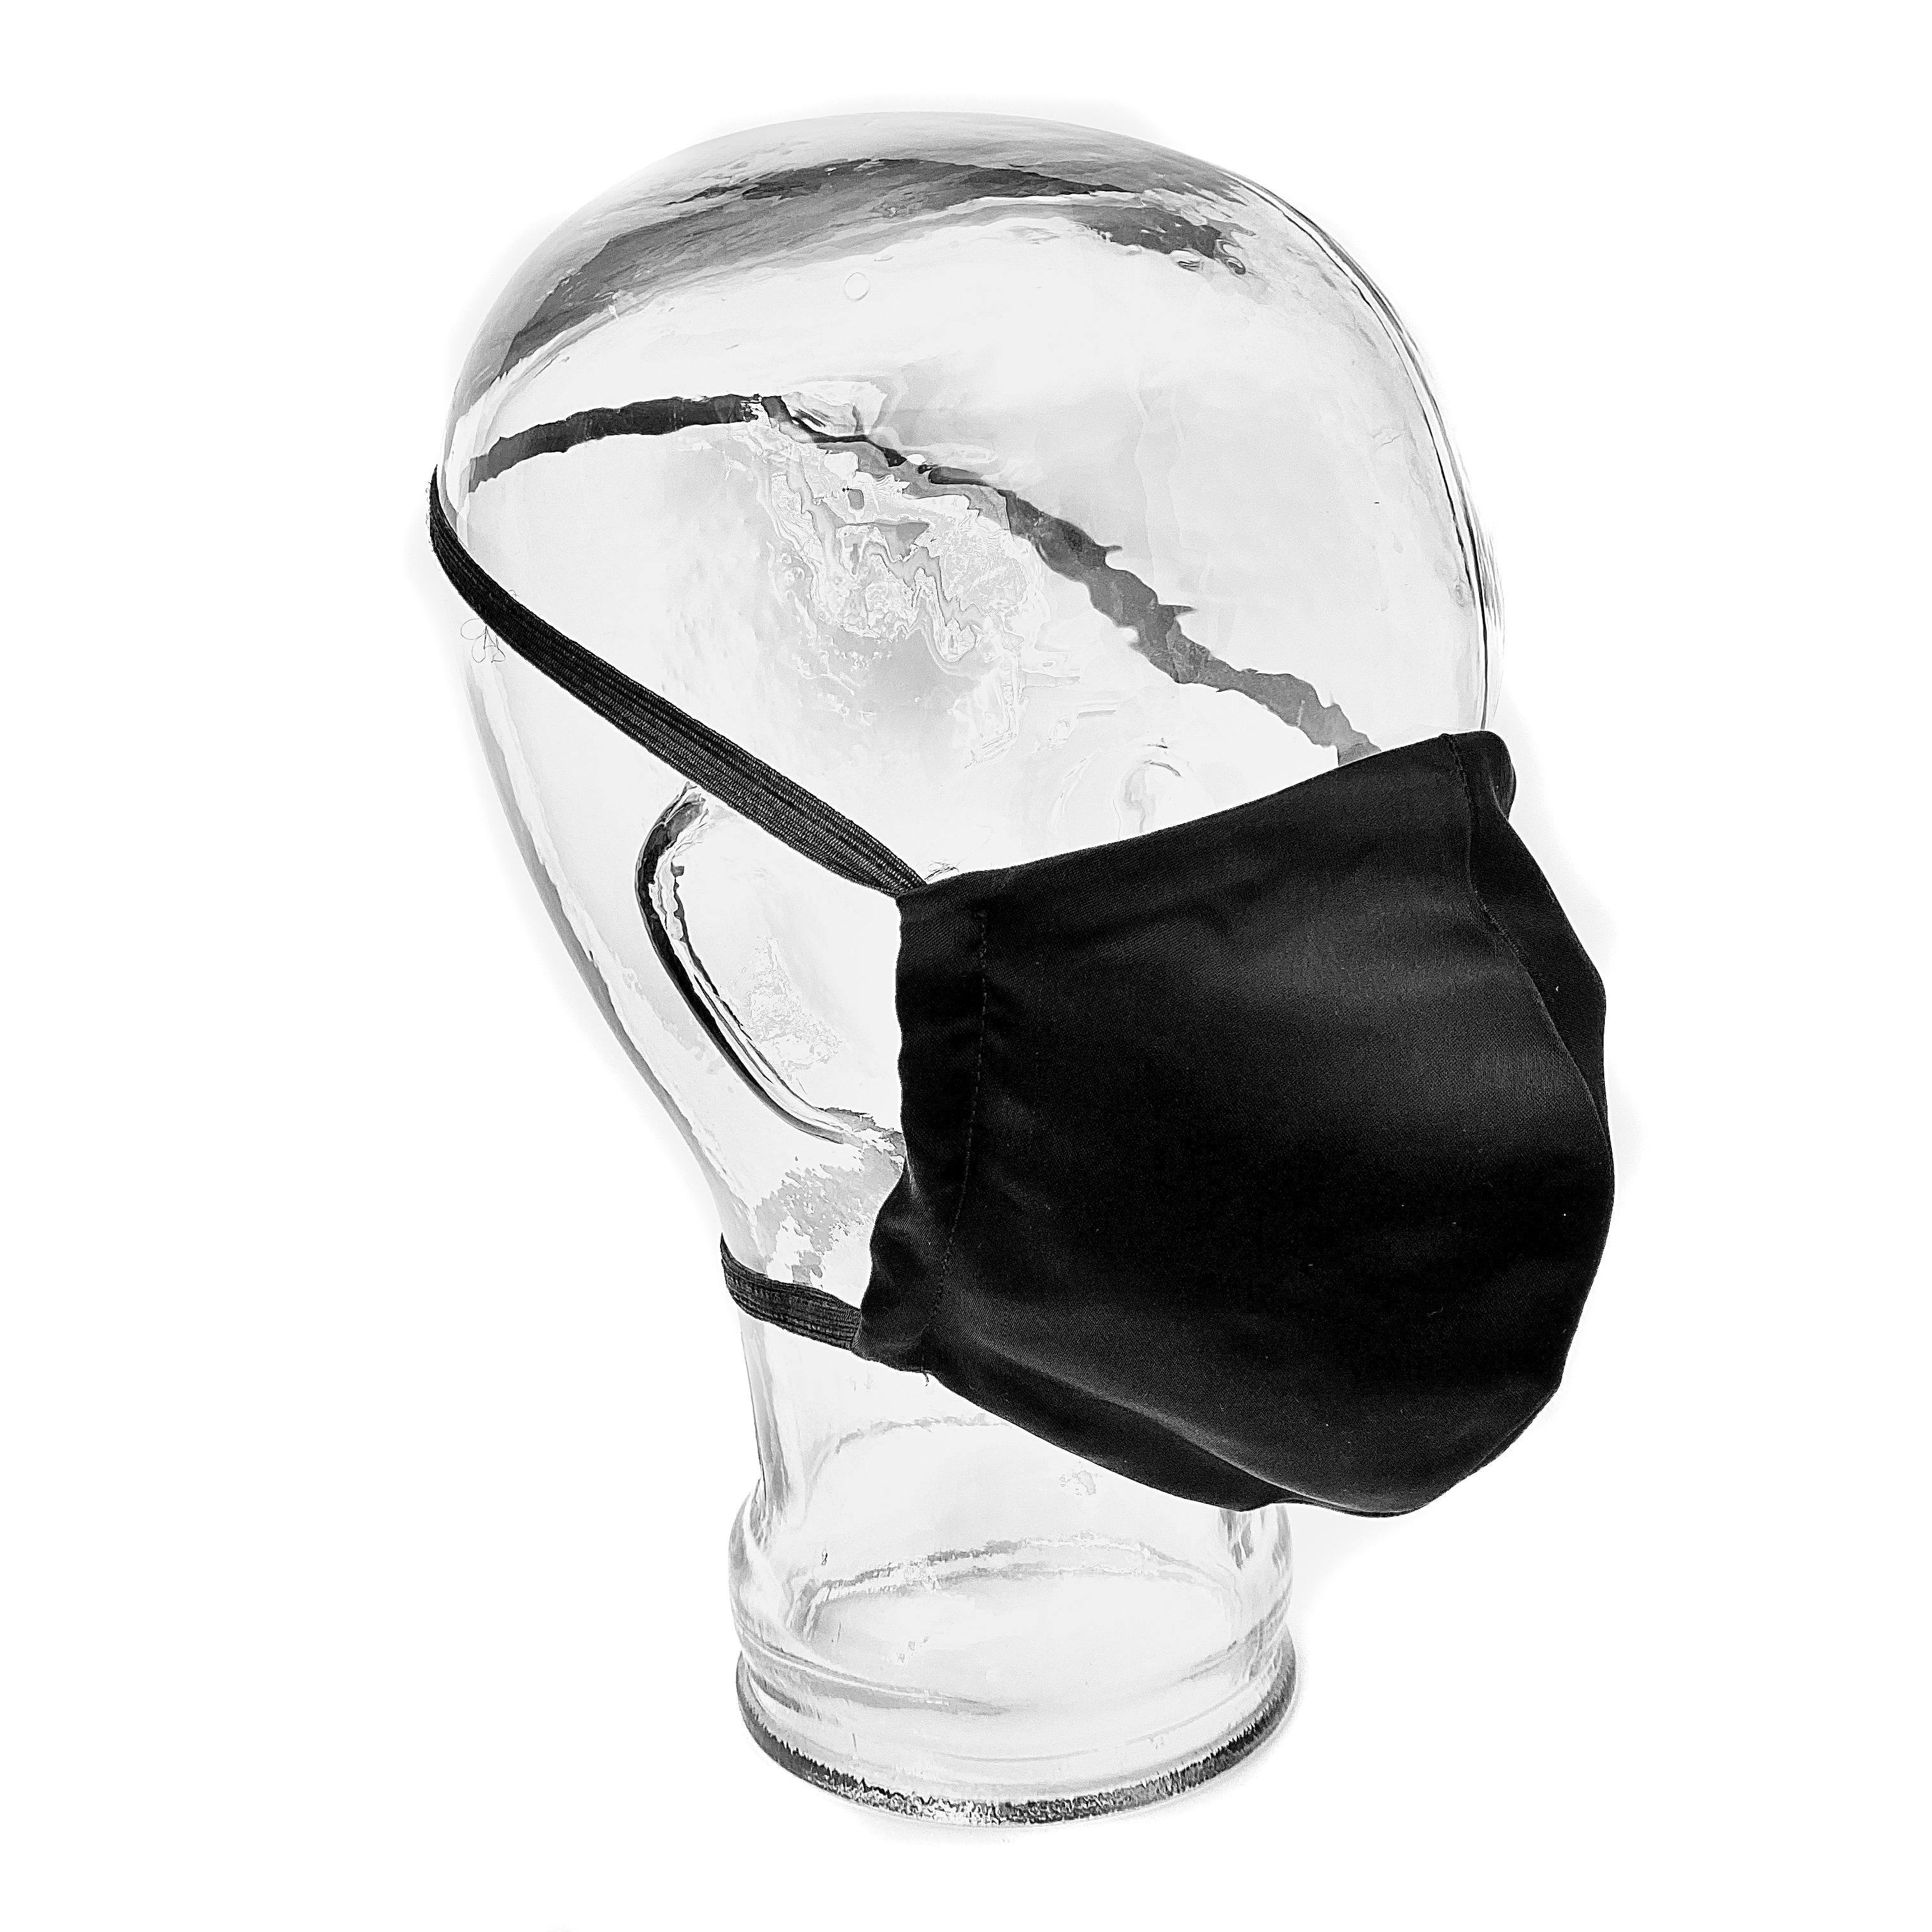 Made in Canada Reusable Fitted Face Mask without earloops - Black - The Peoples Mask